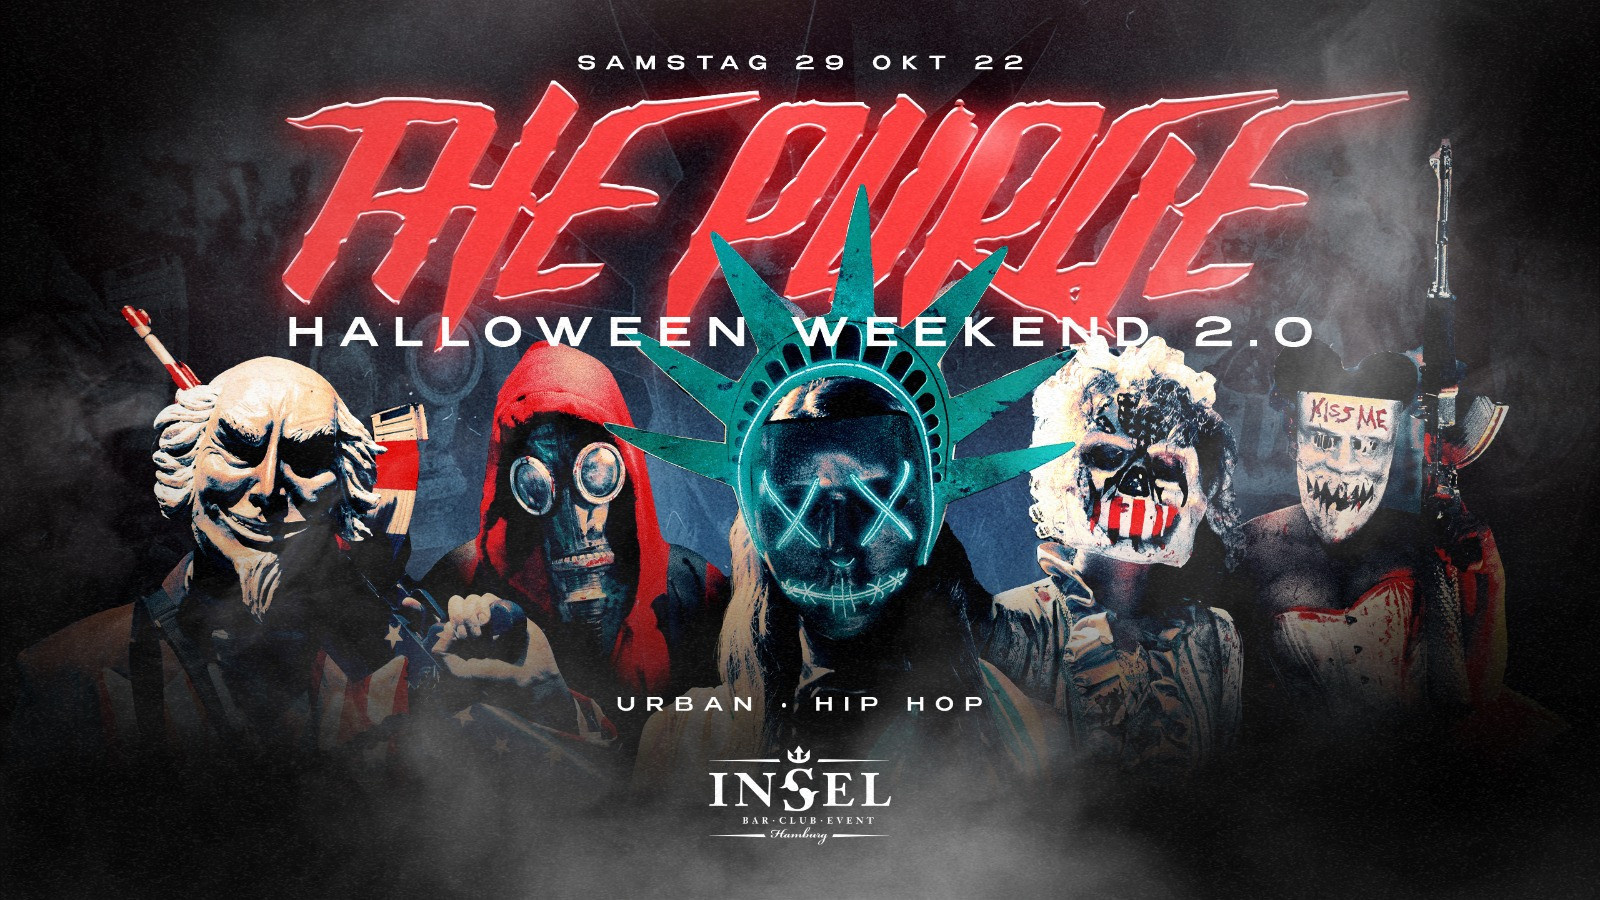 THE PURGE - THE NIGHTS WE LIVE FOR - HALLOWEEN EDITION